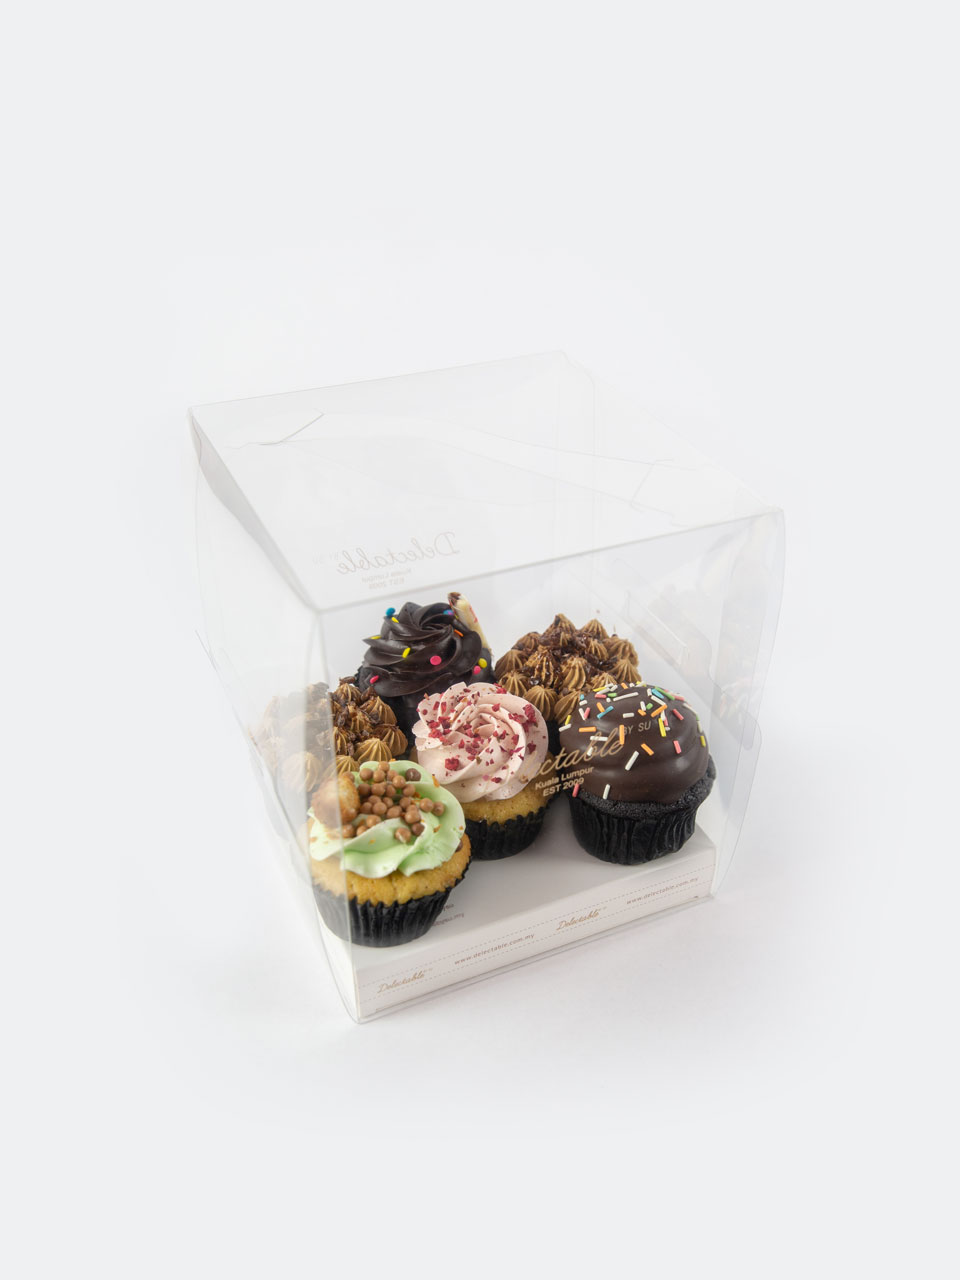 Delectable Cupcakes - Online cupcakes delivery Malaysia